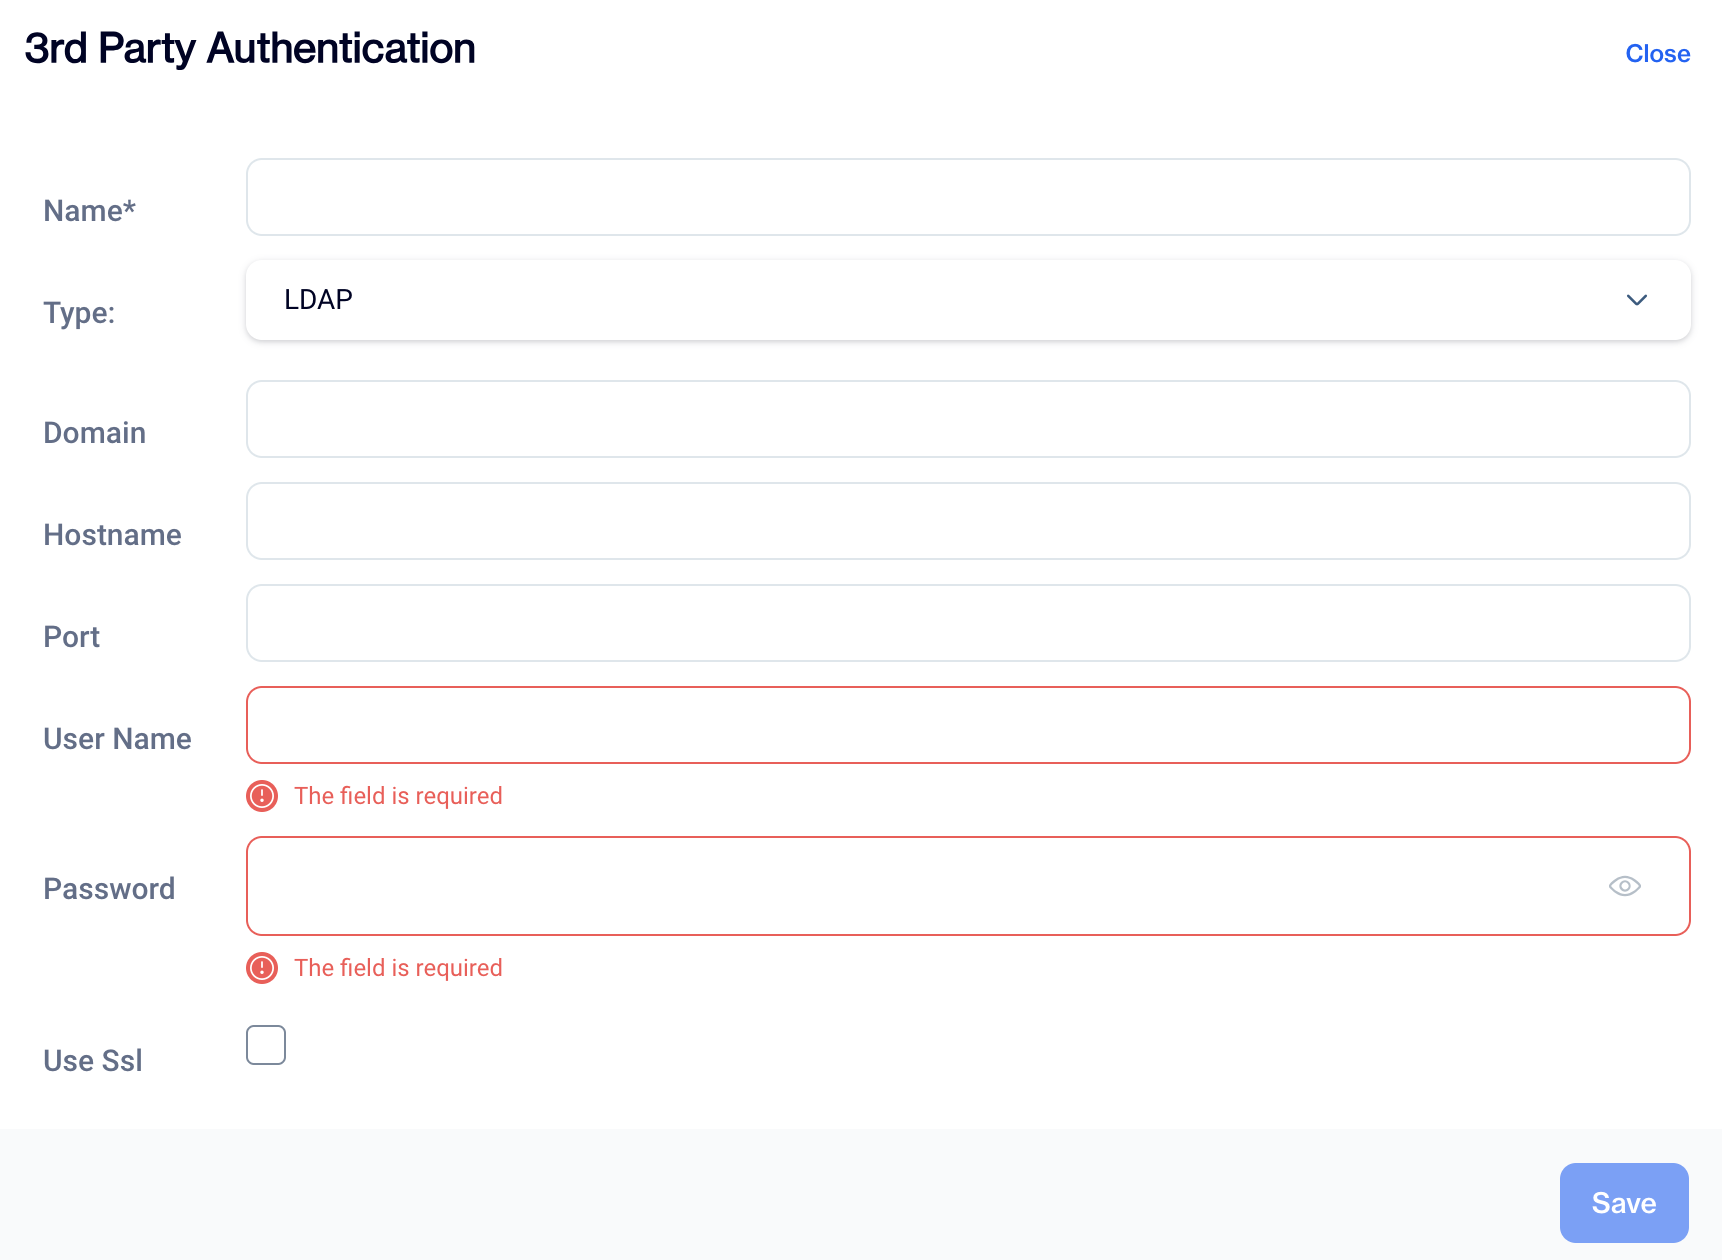 Dengage only supports LDAP Authentication